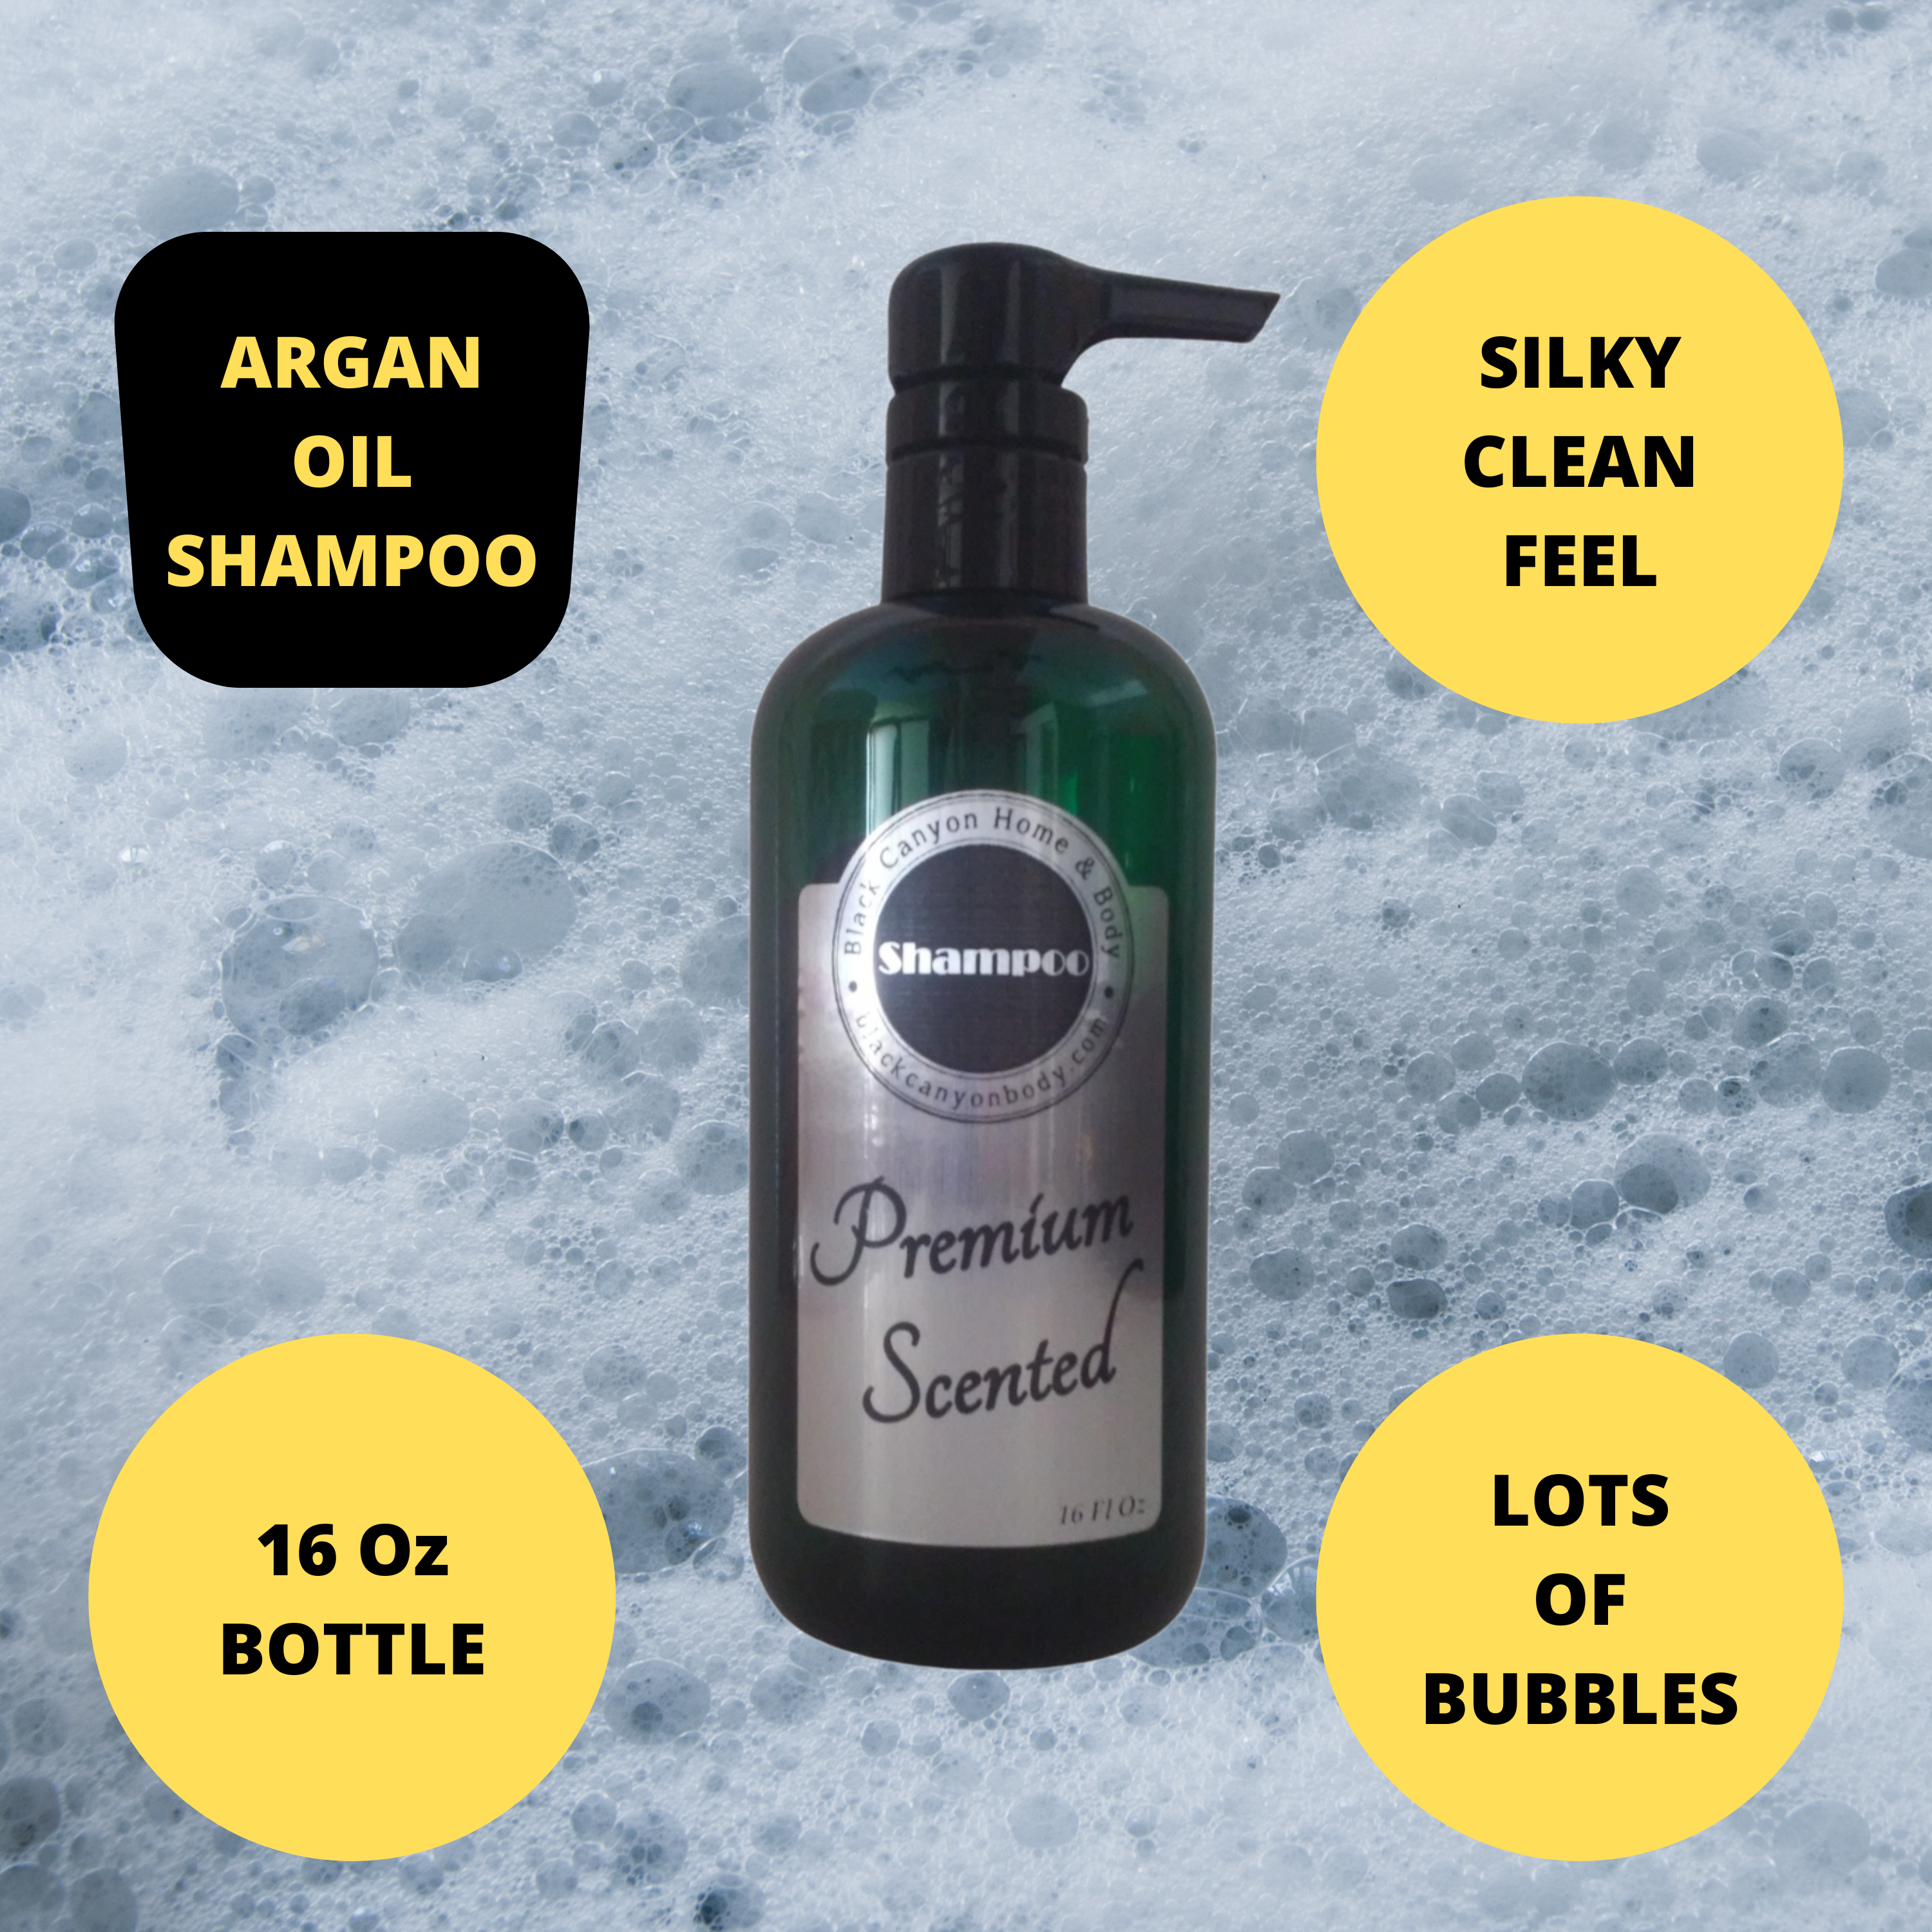 Black Canyon Lemon & Sugared Rose Scented Shampoo with Argan Oil